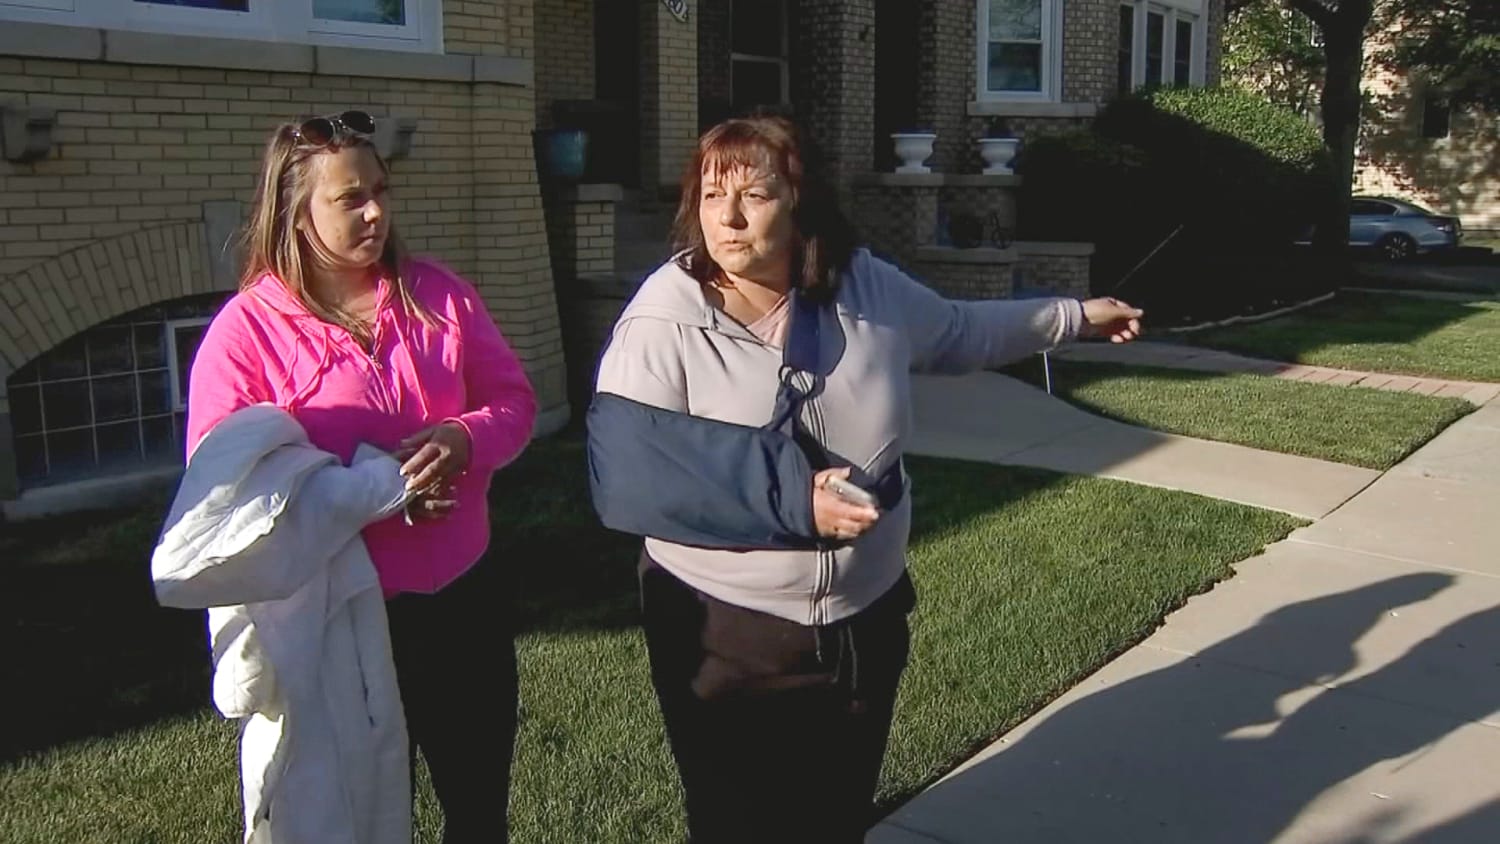 Chicago woman, 64, was beaten while struggling with gunman who stole her French bulldog